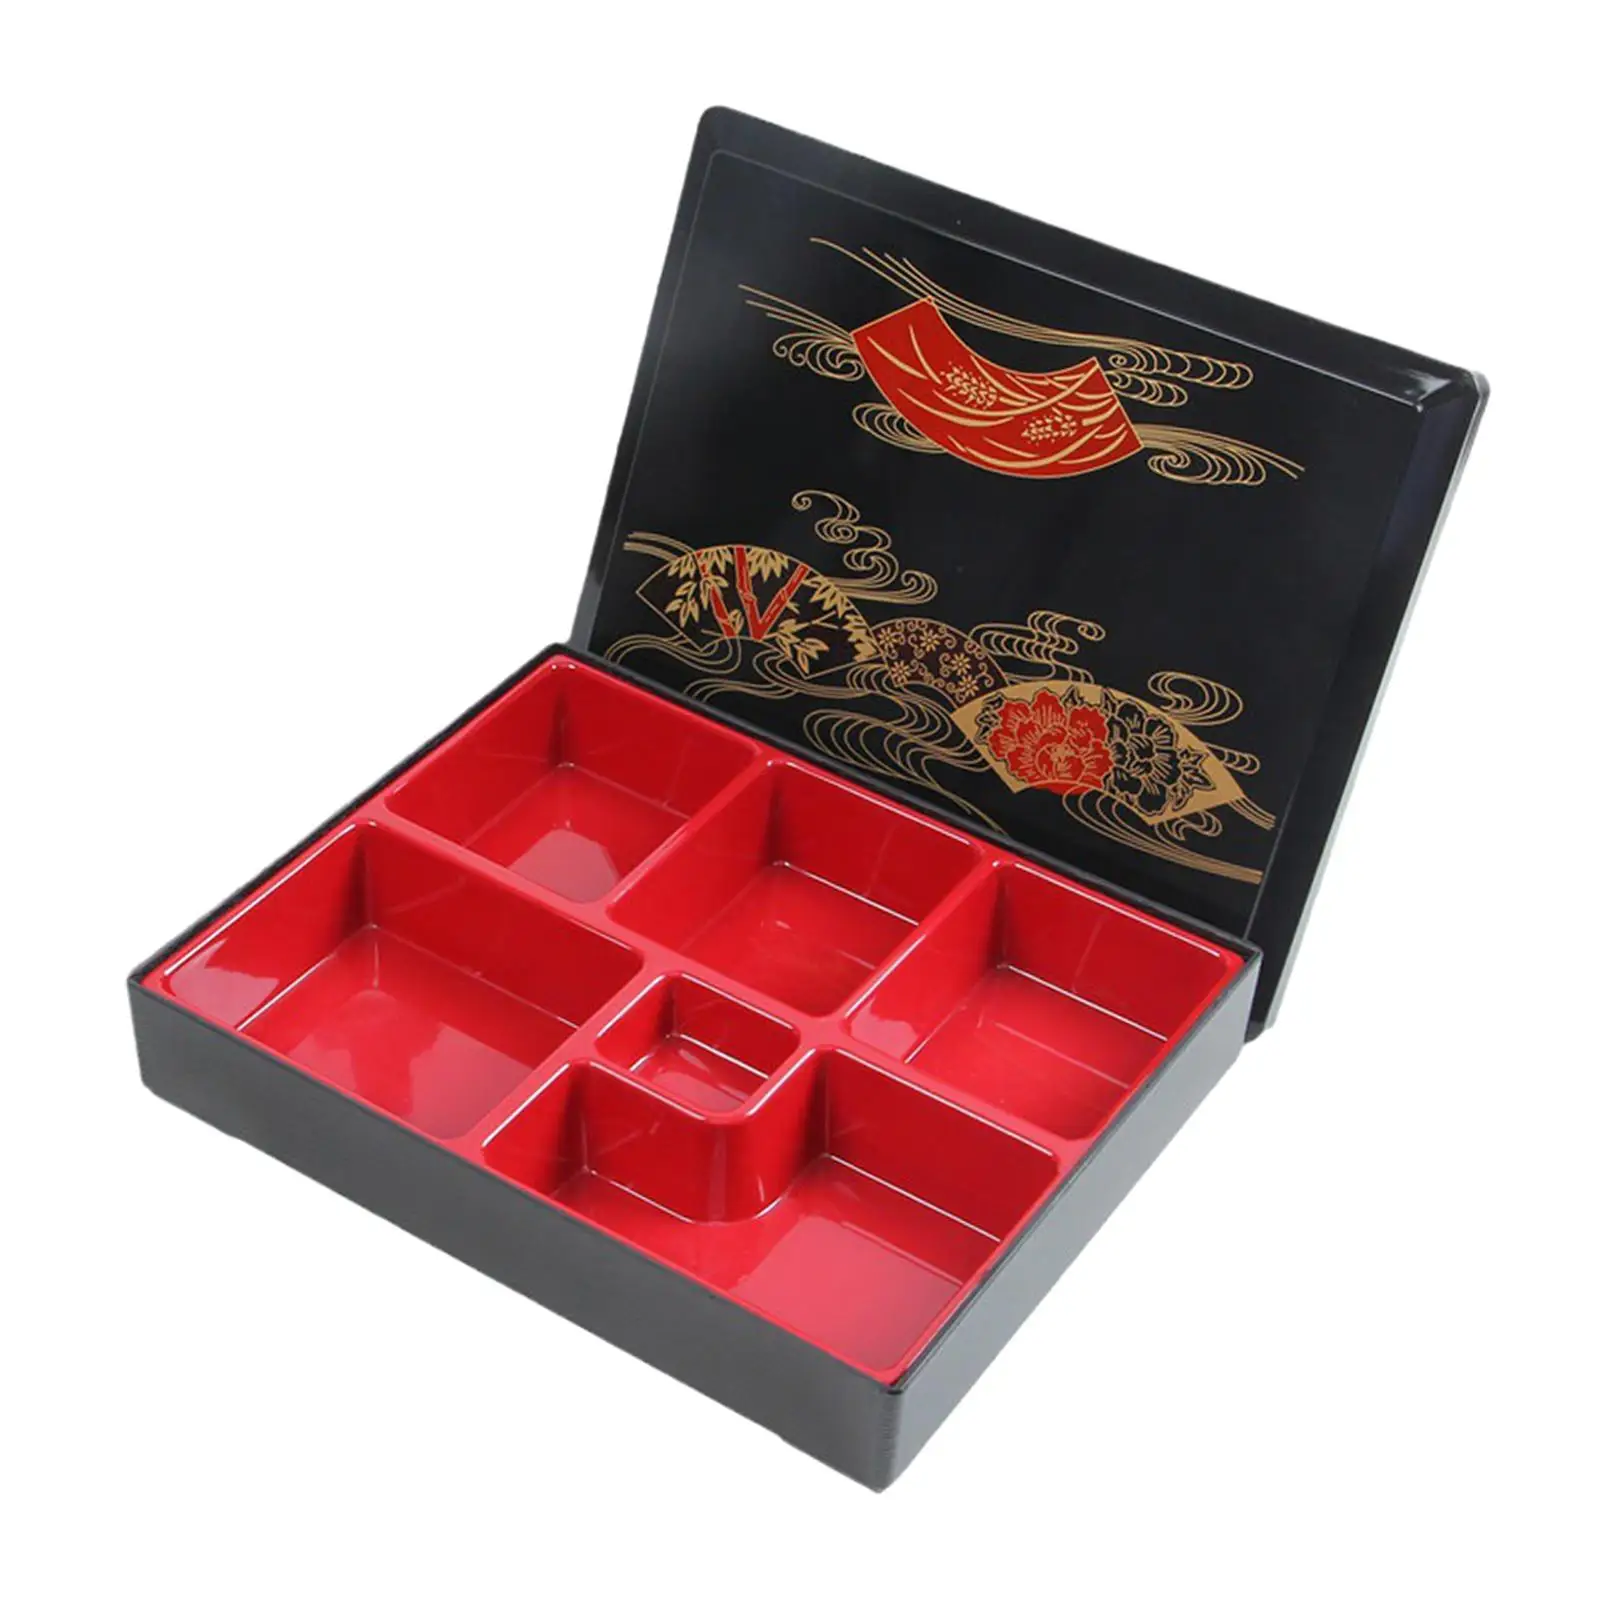 Japanese Bento Box Food Container for Restaurant Picnic Sushi, Rice, Sauce